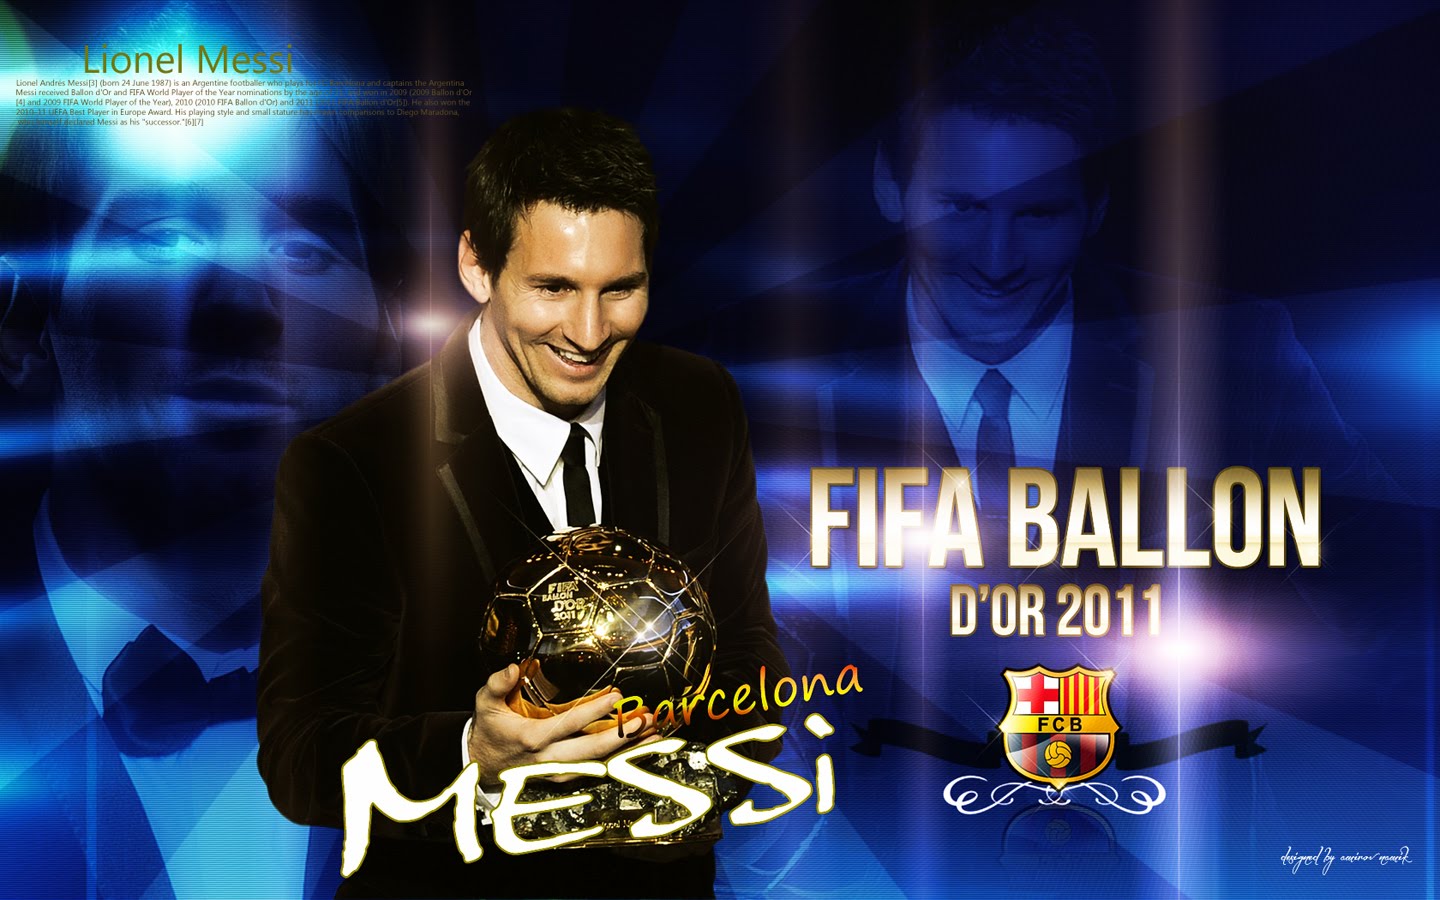 Lionel Messi Best Player Wallpaper Pictures